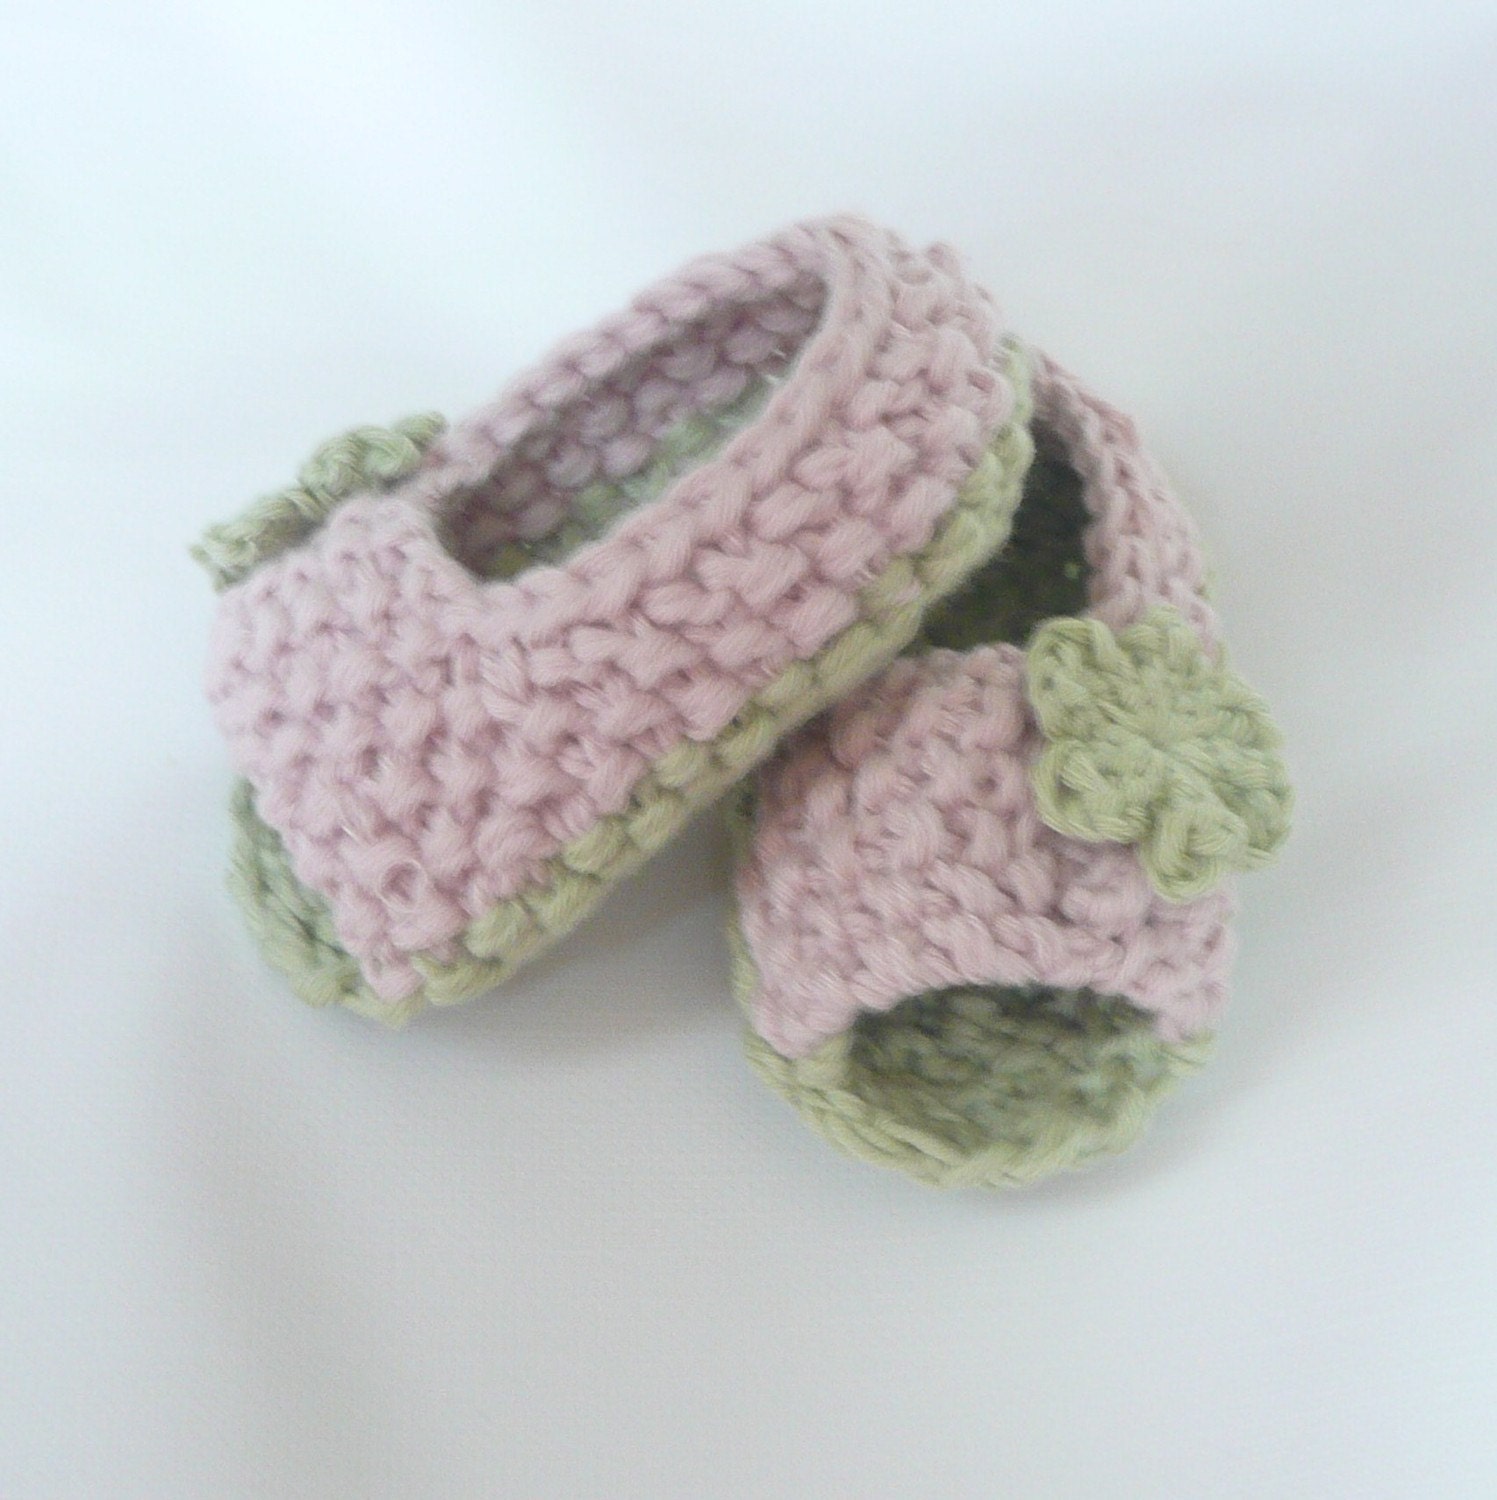 Knitting PATTERN Booties Baby Peeptoe Sandals Shoes by ceradka